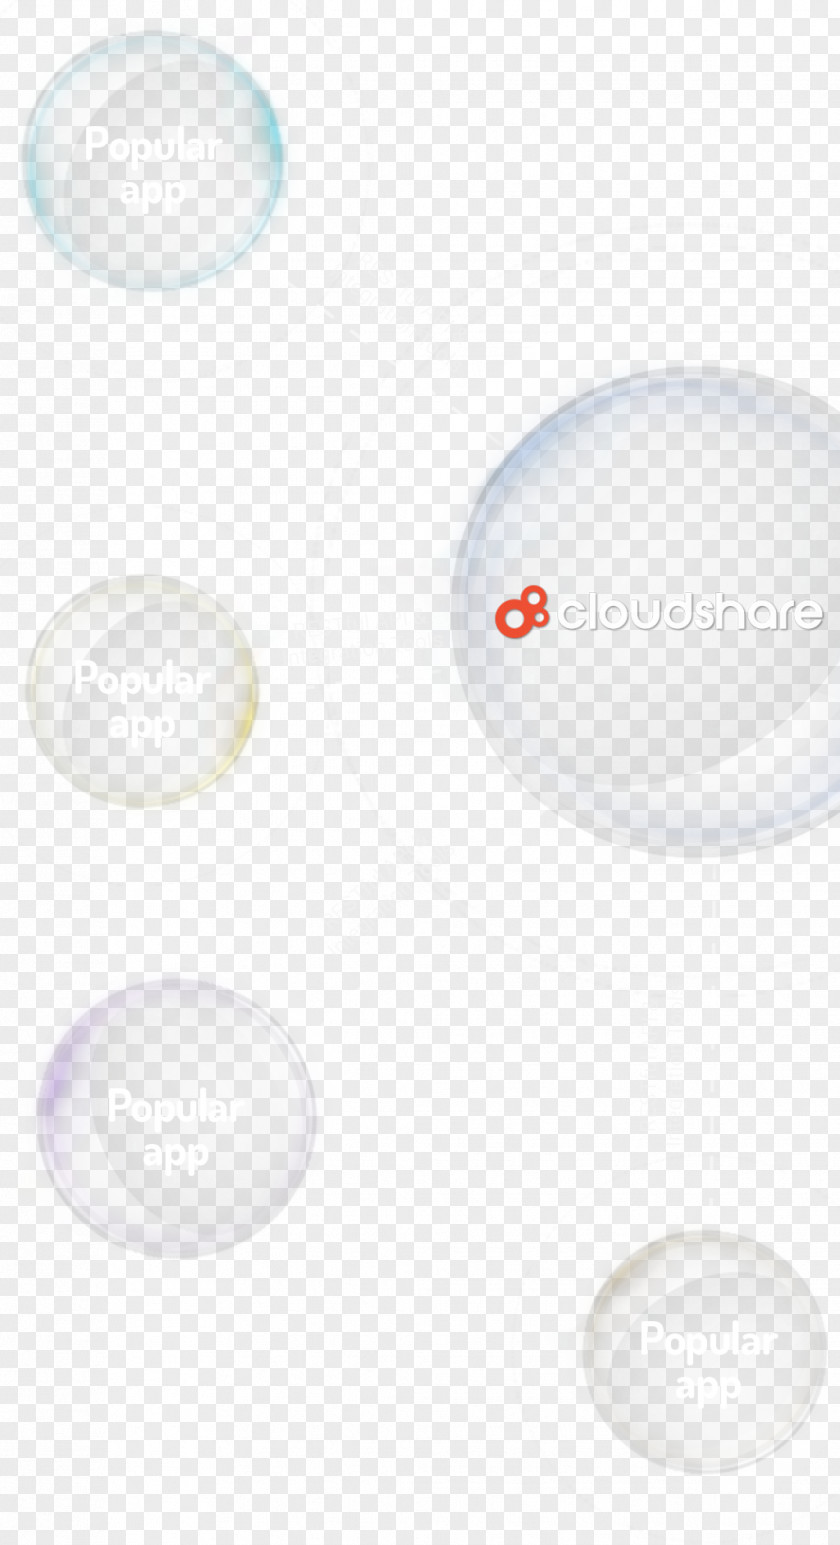 Cloud Share Plastic Material PNG